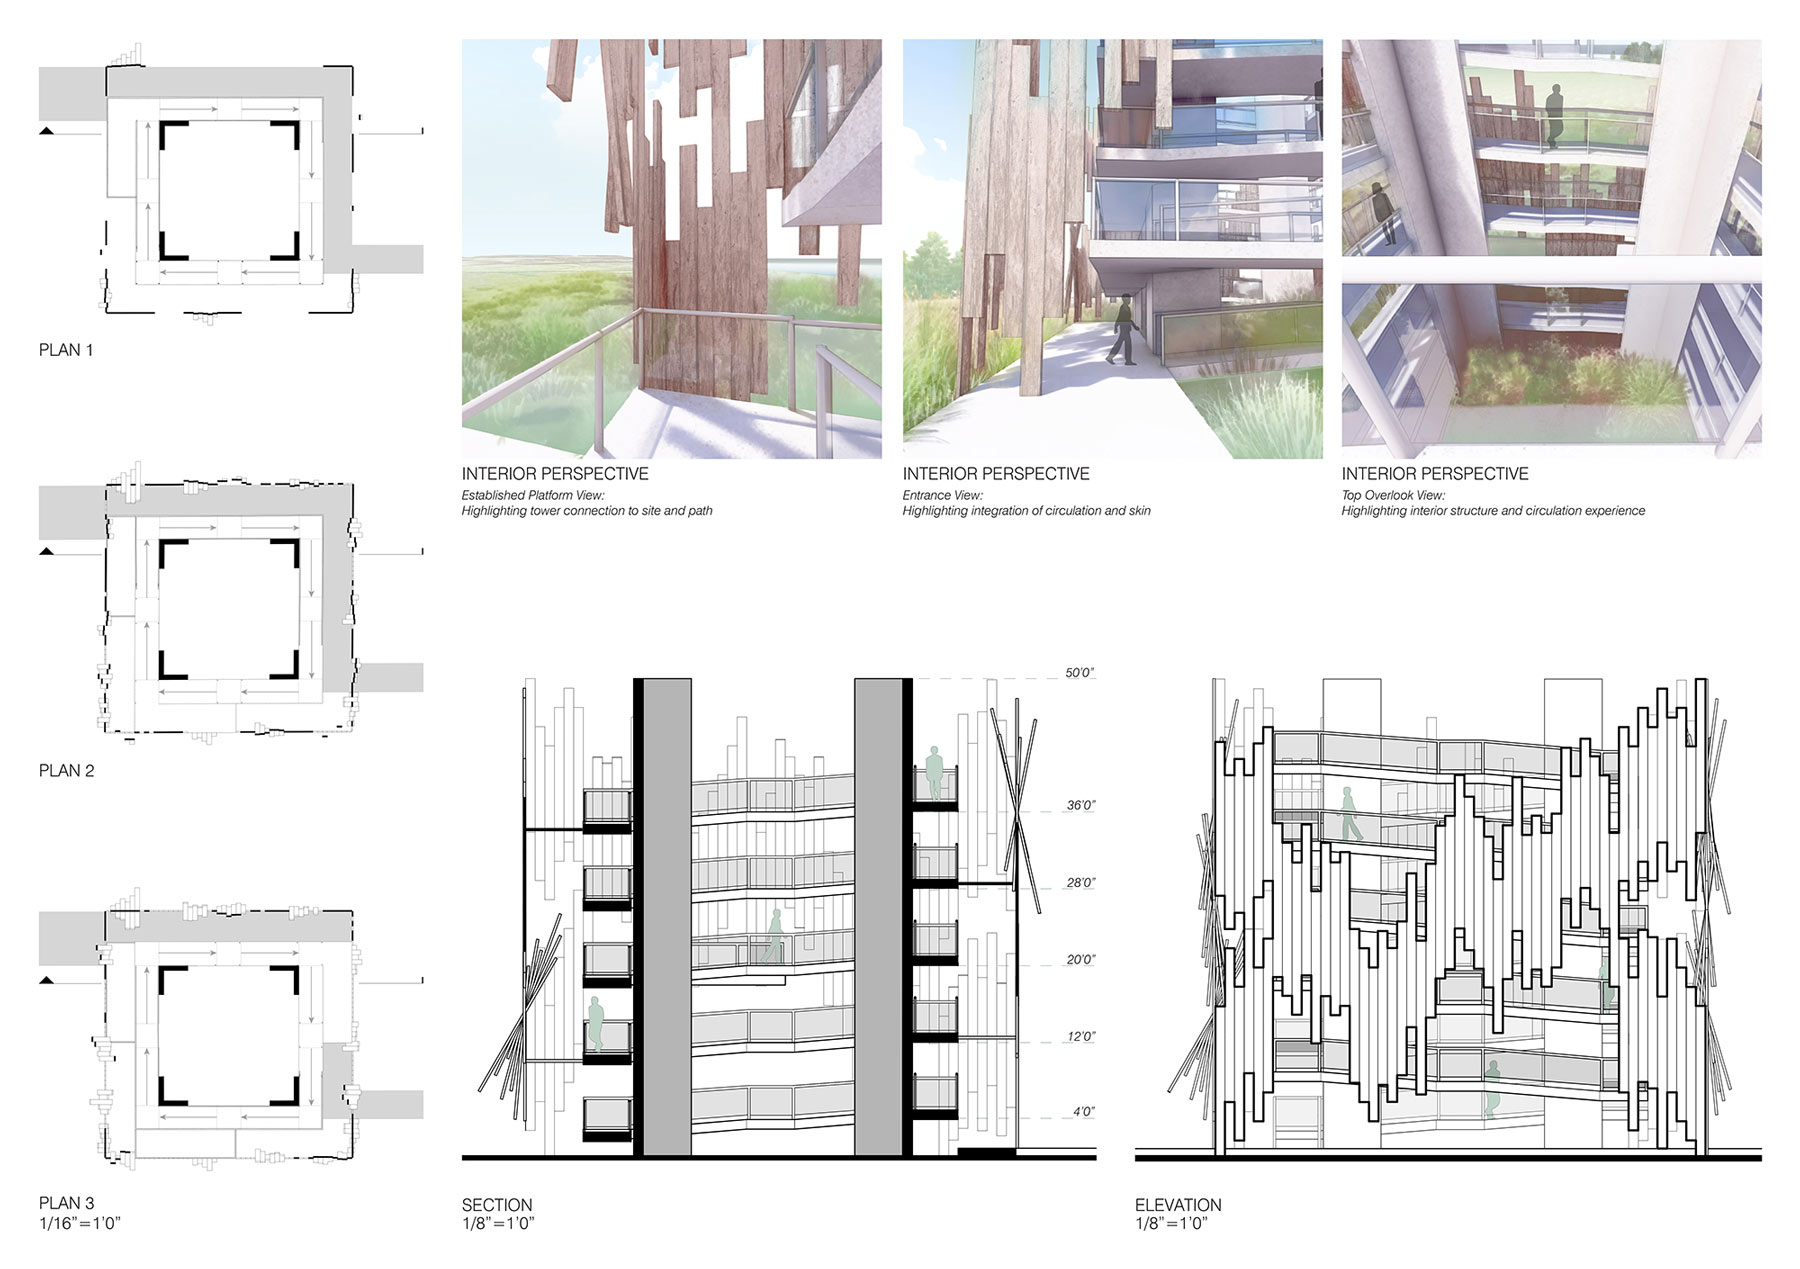 A collage of eight different photos. Most of these photos are blueprints of what said building will look like, and three are colored drawings of the finished project made out of what looks like light wood panels stacked unleveled, parallel to each other.